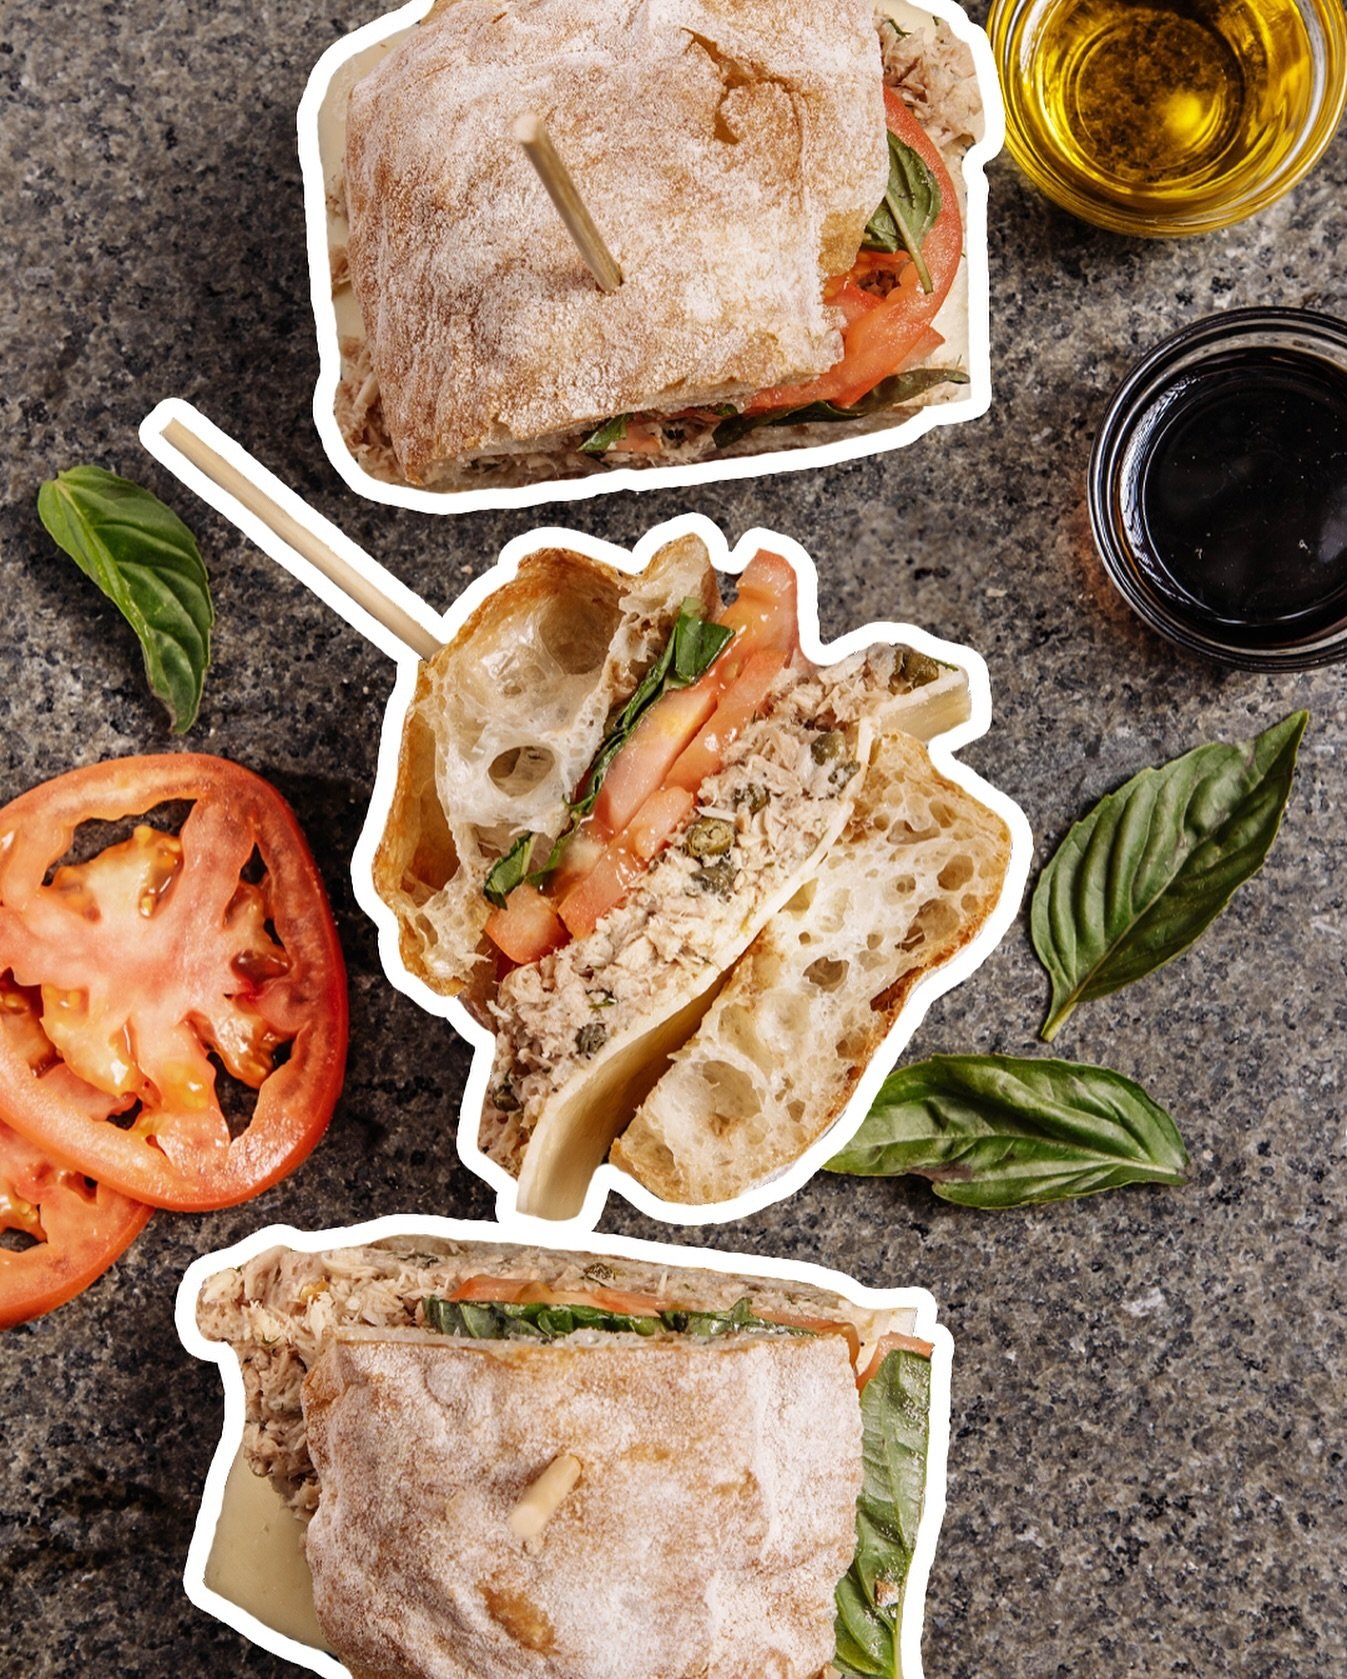 Revitalize your next event with PCD! 🥪 Our sandwiches are the perfect addition for any occasion. Just fill out the form on our website to get started!